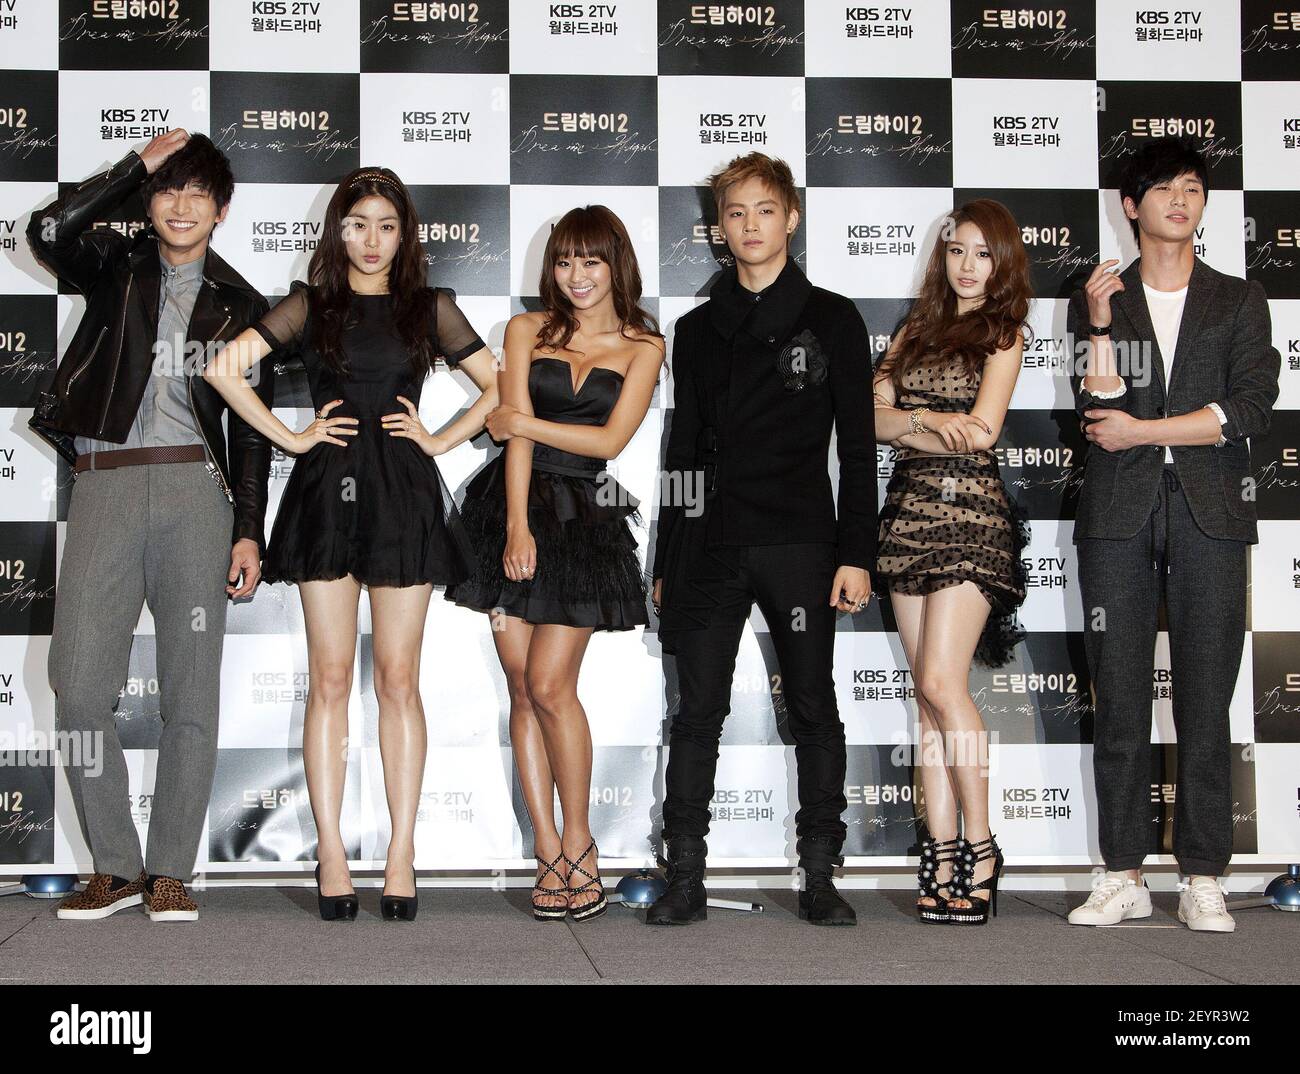 17 January 2012 - Seoul, South Korea - (L-R) South Korean K-pop boys band members of 2AM vocalist and main rapper Jung Jin-woon, actress Kang So-Ra, girl group members of Sistar singer Hyo Rin, actor JB, girl group members of T-ara singer Park Ji Yeon and actor Park Suh-jun, attend a photo call during a publicity event for the KBS TV drama 'Dream High 2' at Imperial Place hotel in Seoul on January 17, 2012. The Drama Monday & Tuesday Another highly anticipating romantic-comedy Korean Drama will be broadcasted starting from January 30, 2012. Photo Credit: Lee Young-ho/Sipa USA Stock Photo